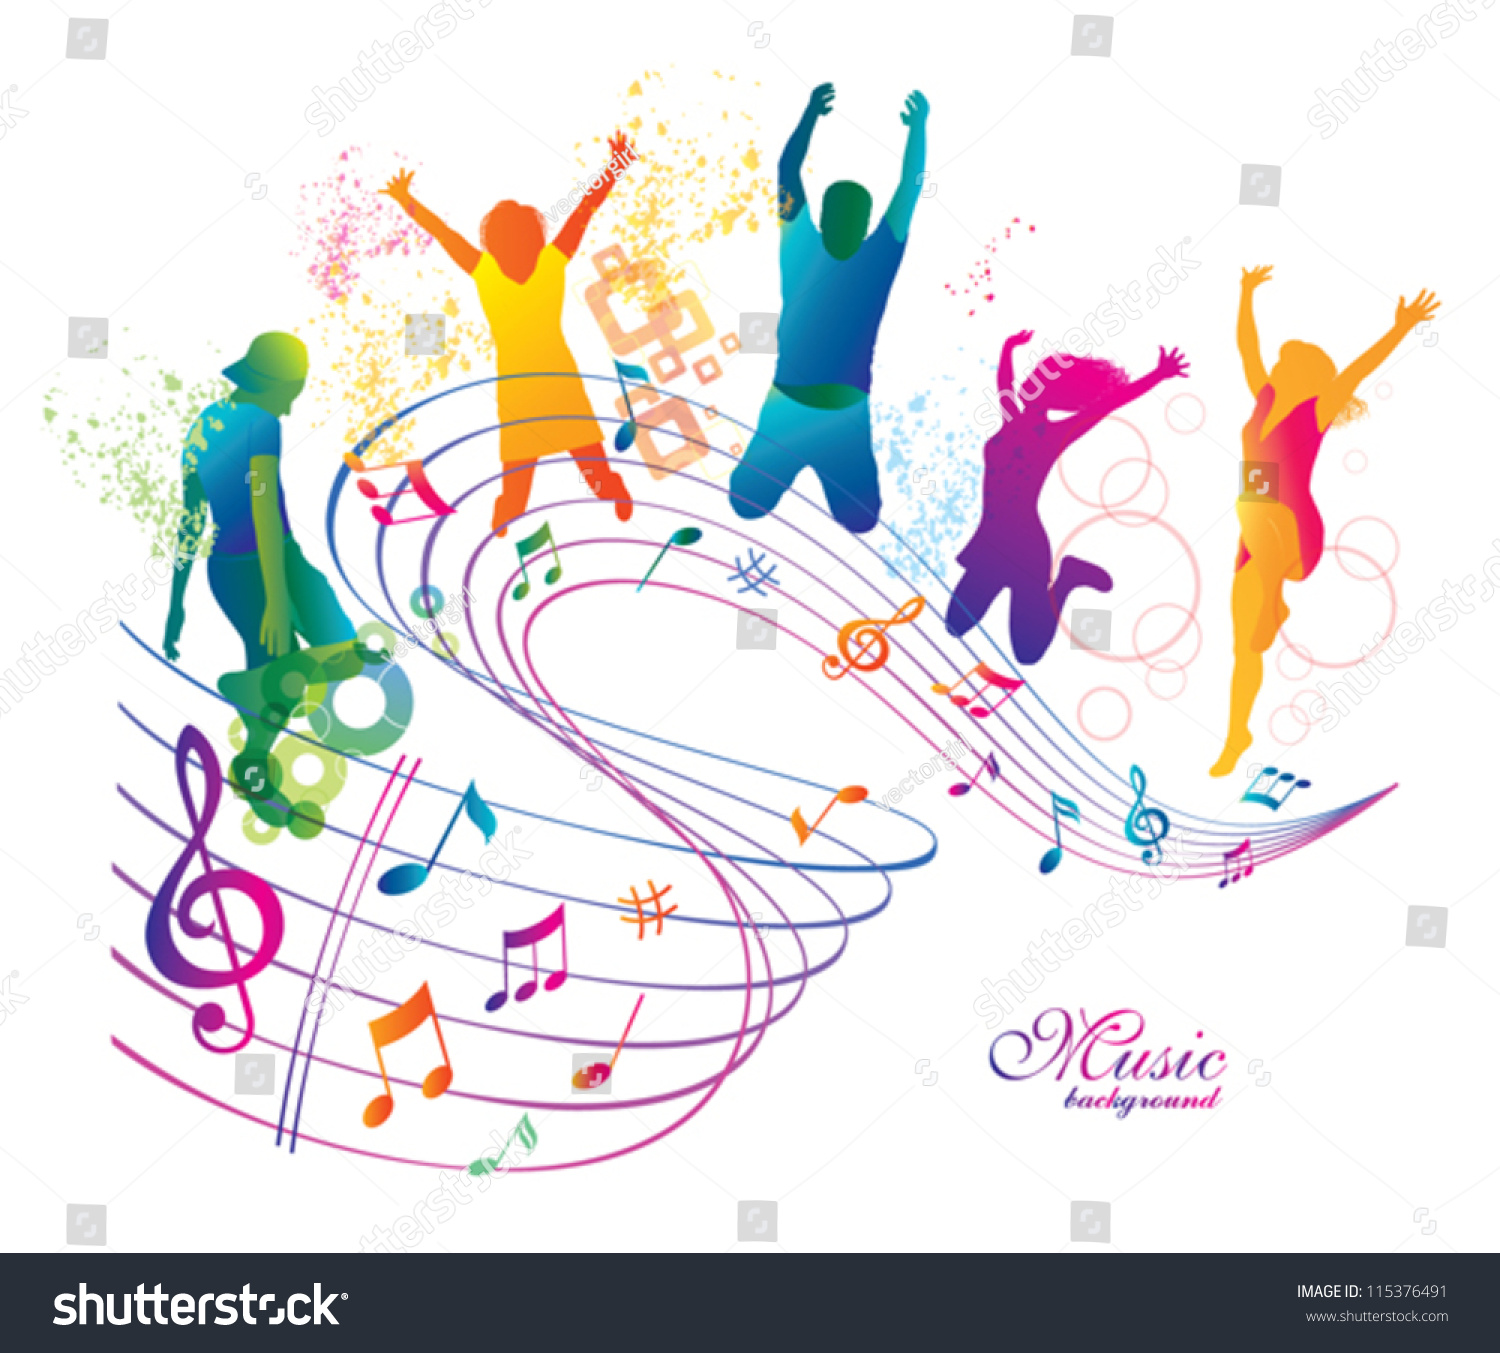 music event clipart - photo #31